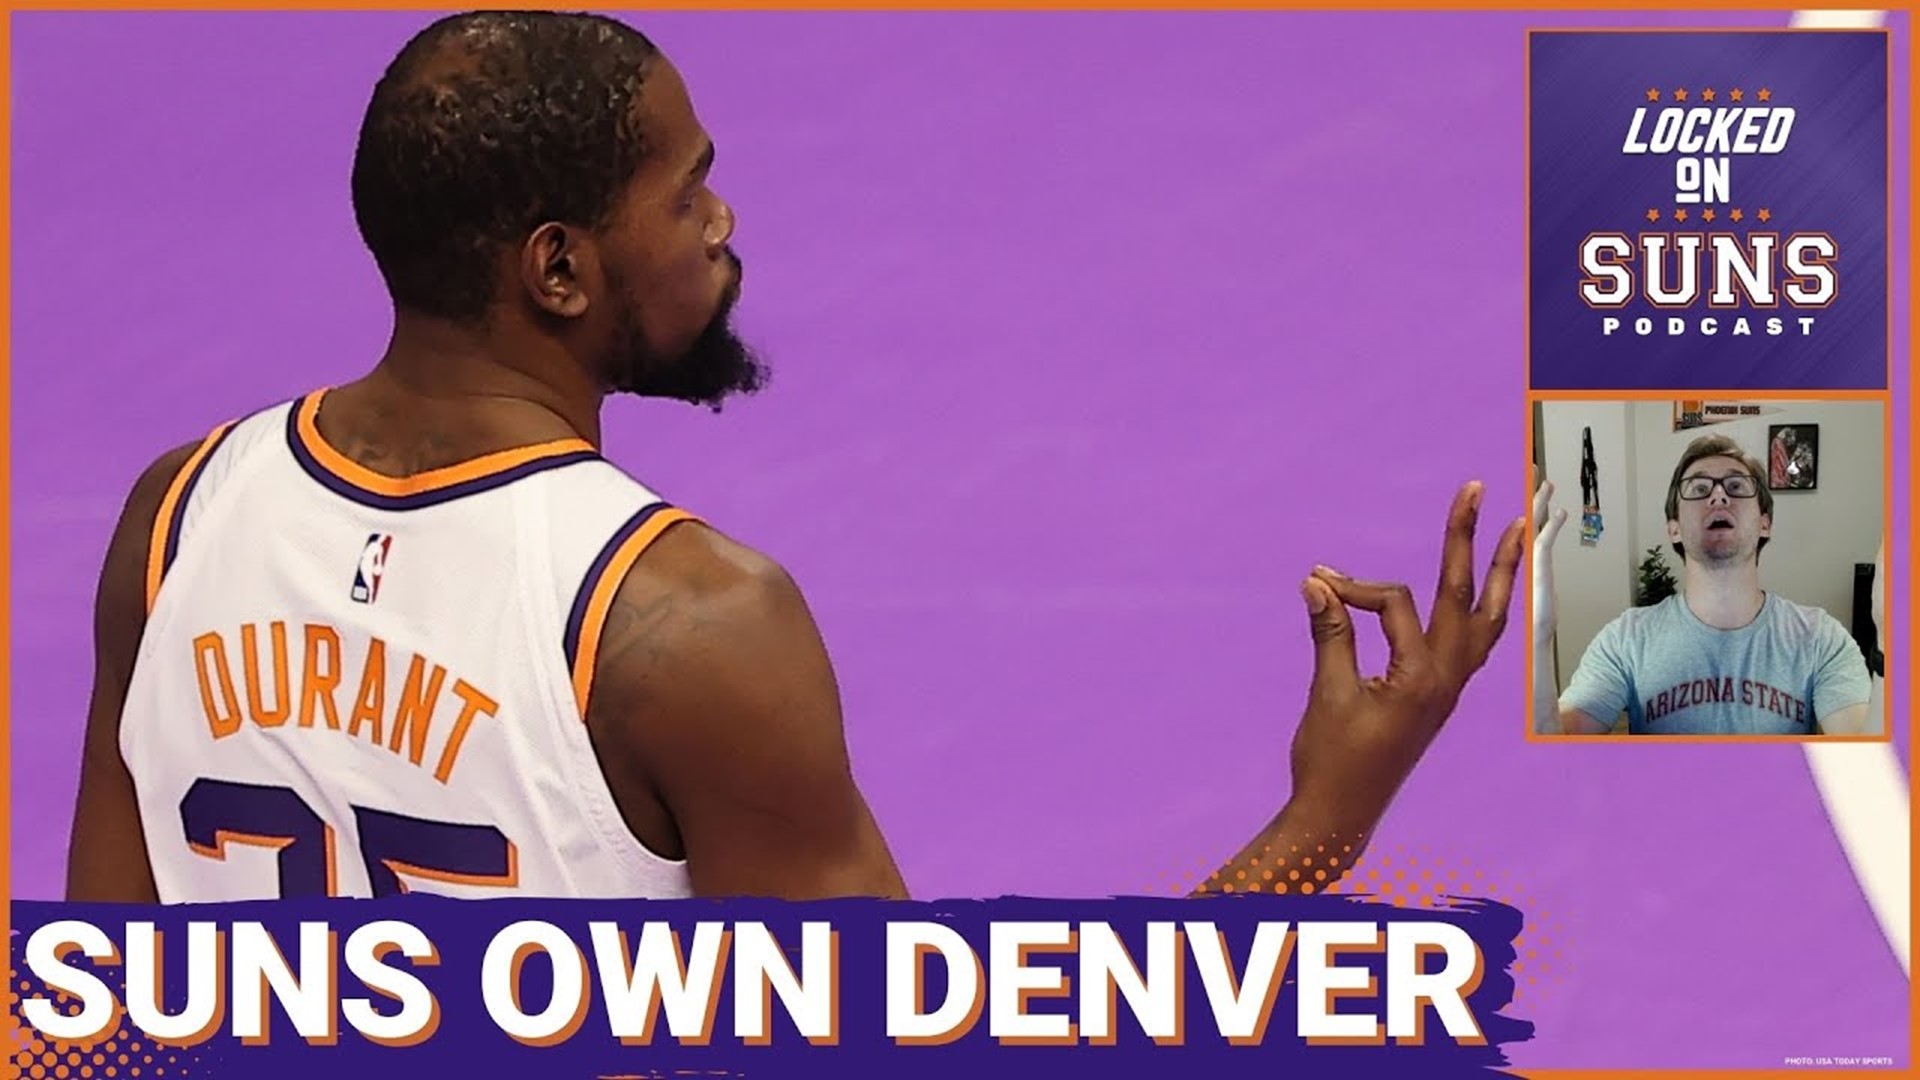 Kevin Durant put up 30 and played lockdown defense as the Phoenix Suns stole a road win from the Denver Nuggets once again to win the season series.